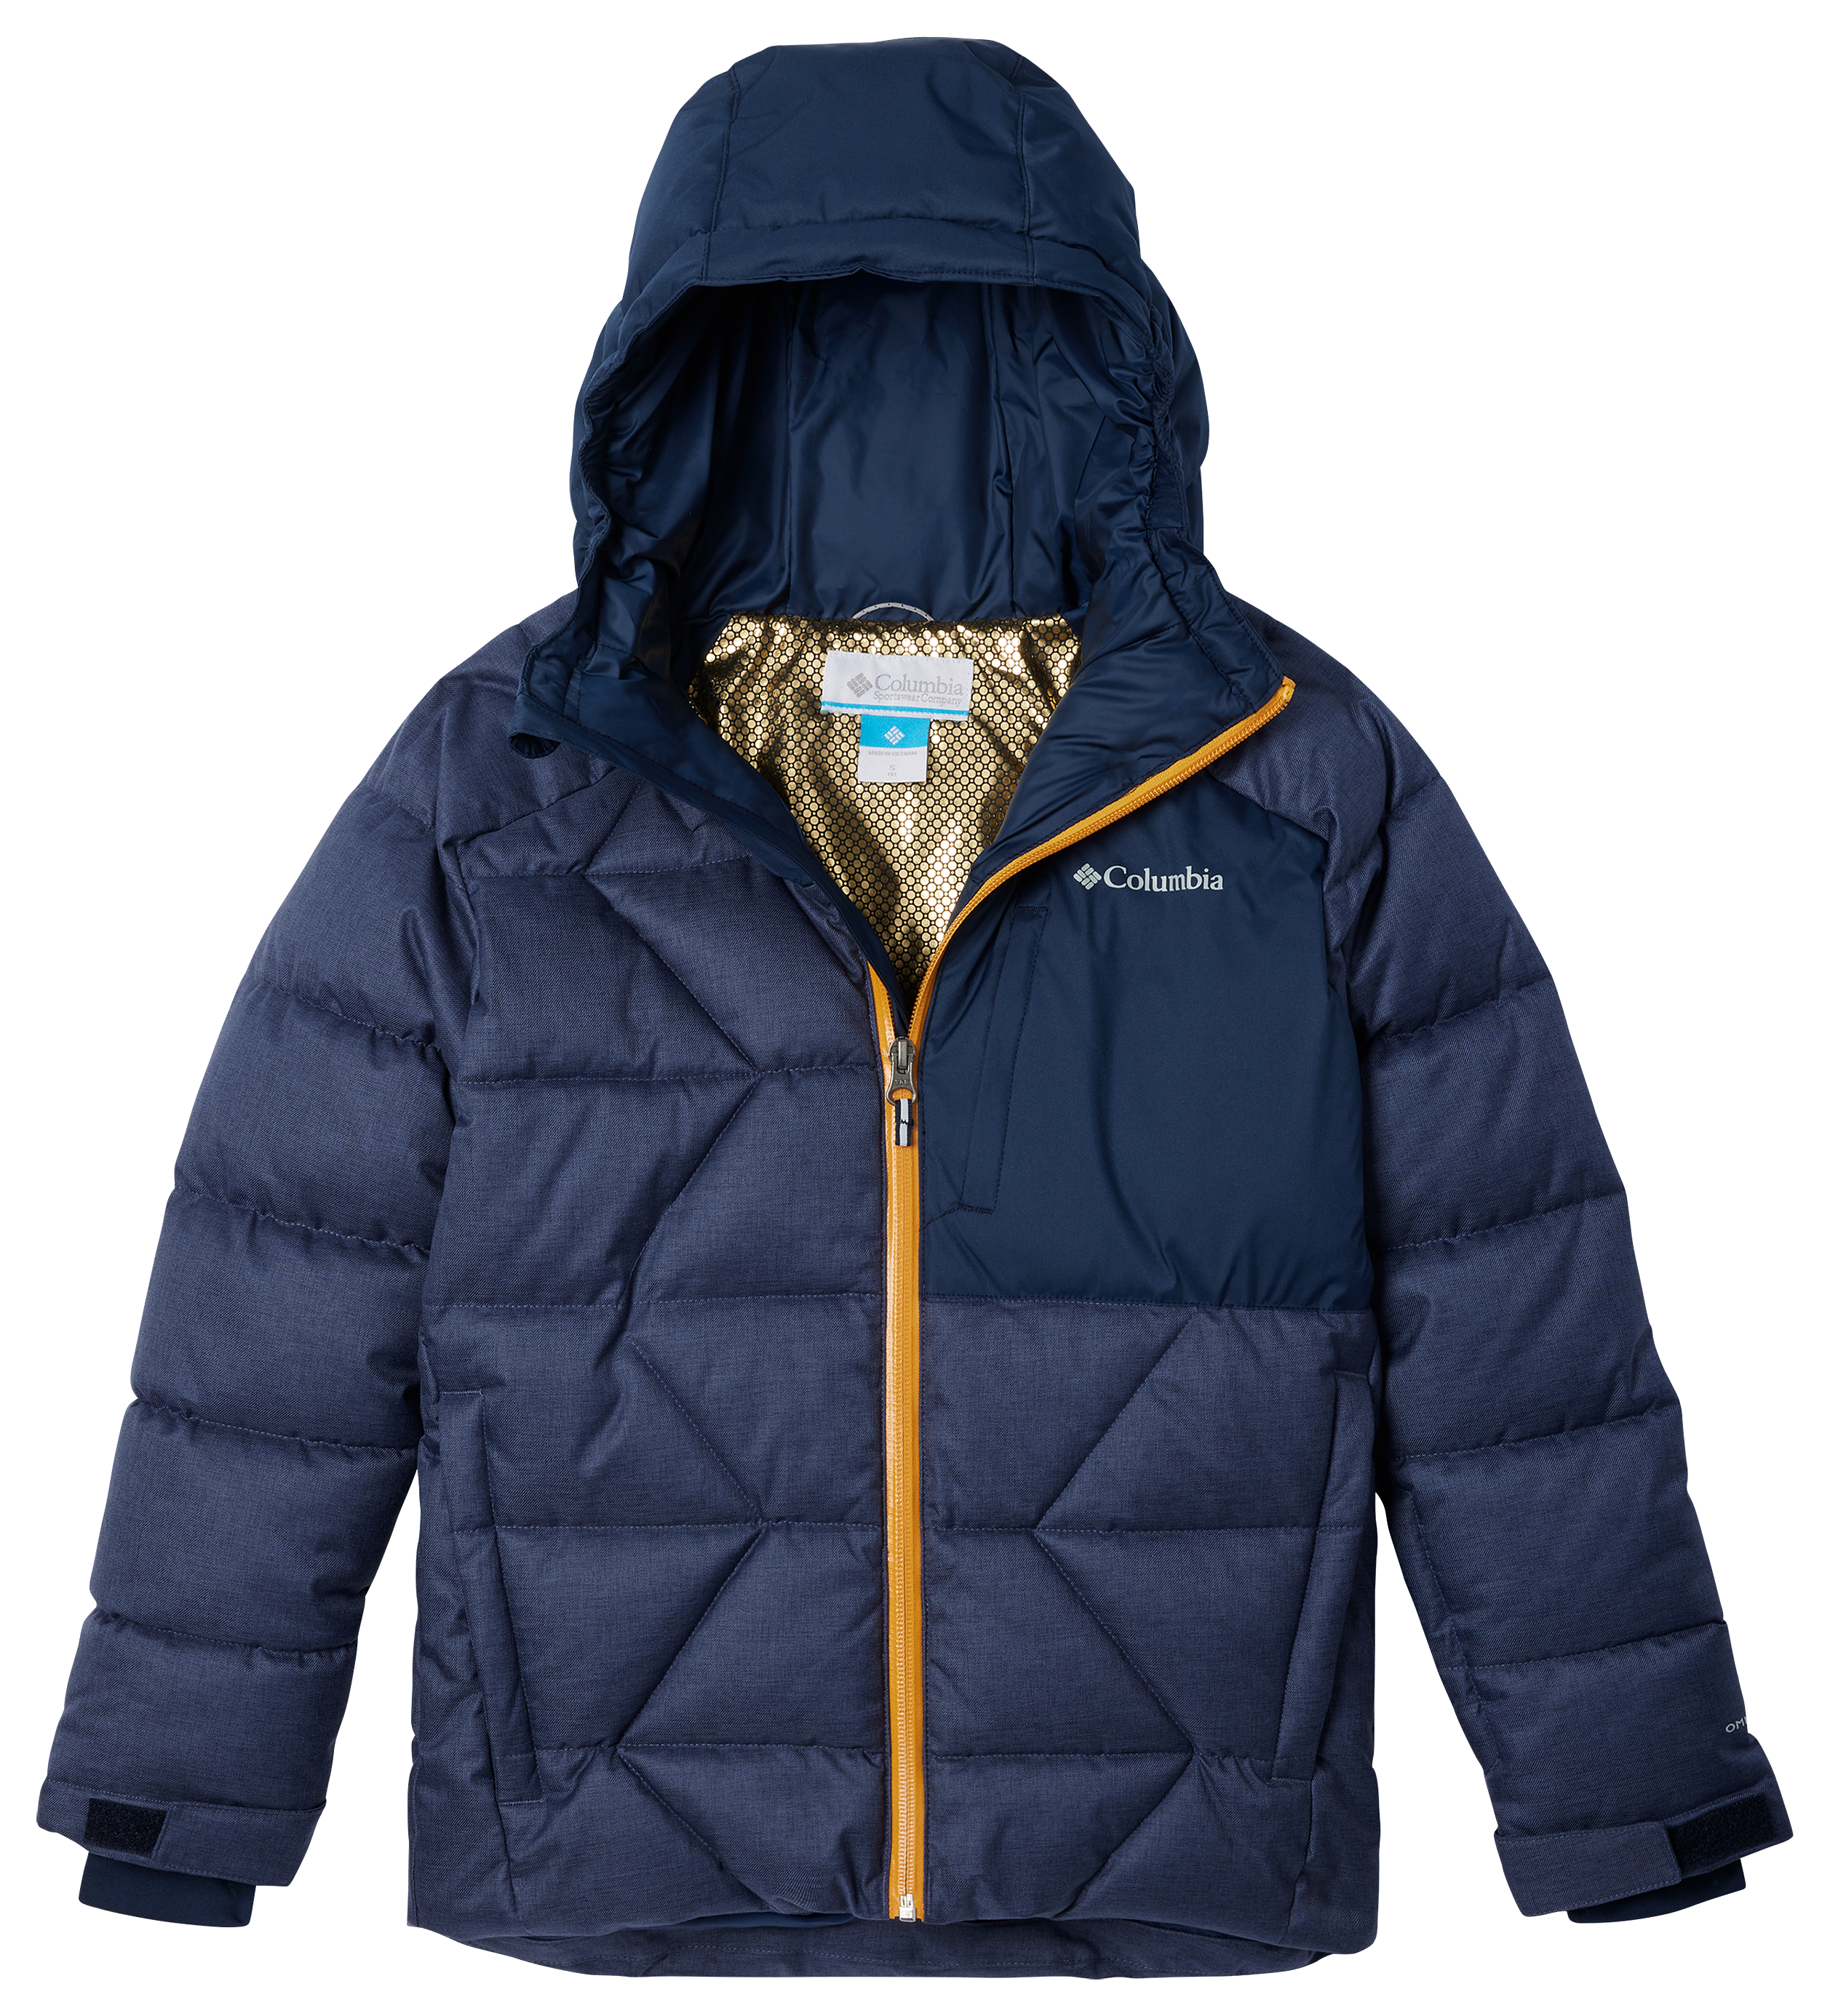 Columbia Winter Powder II Quilted Jacket with Zip Chest Pocket for Kids